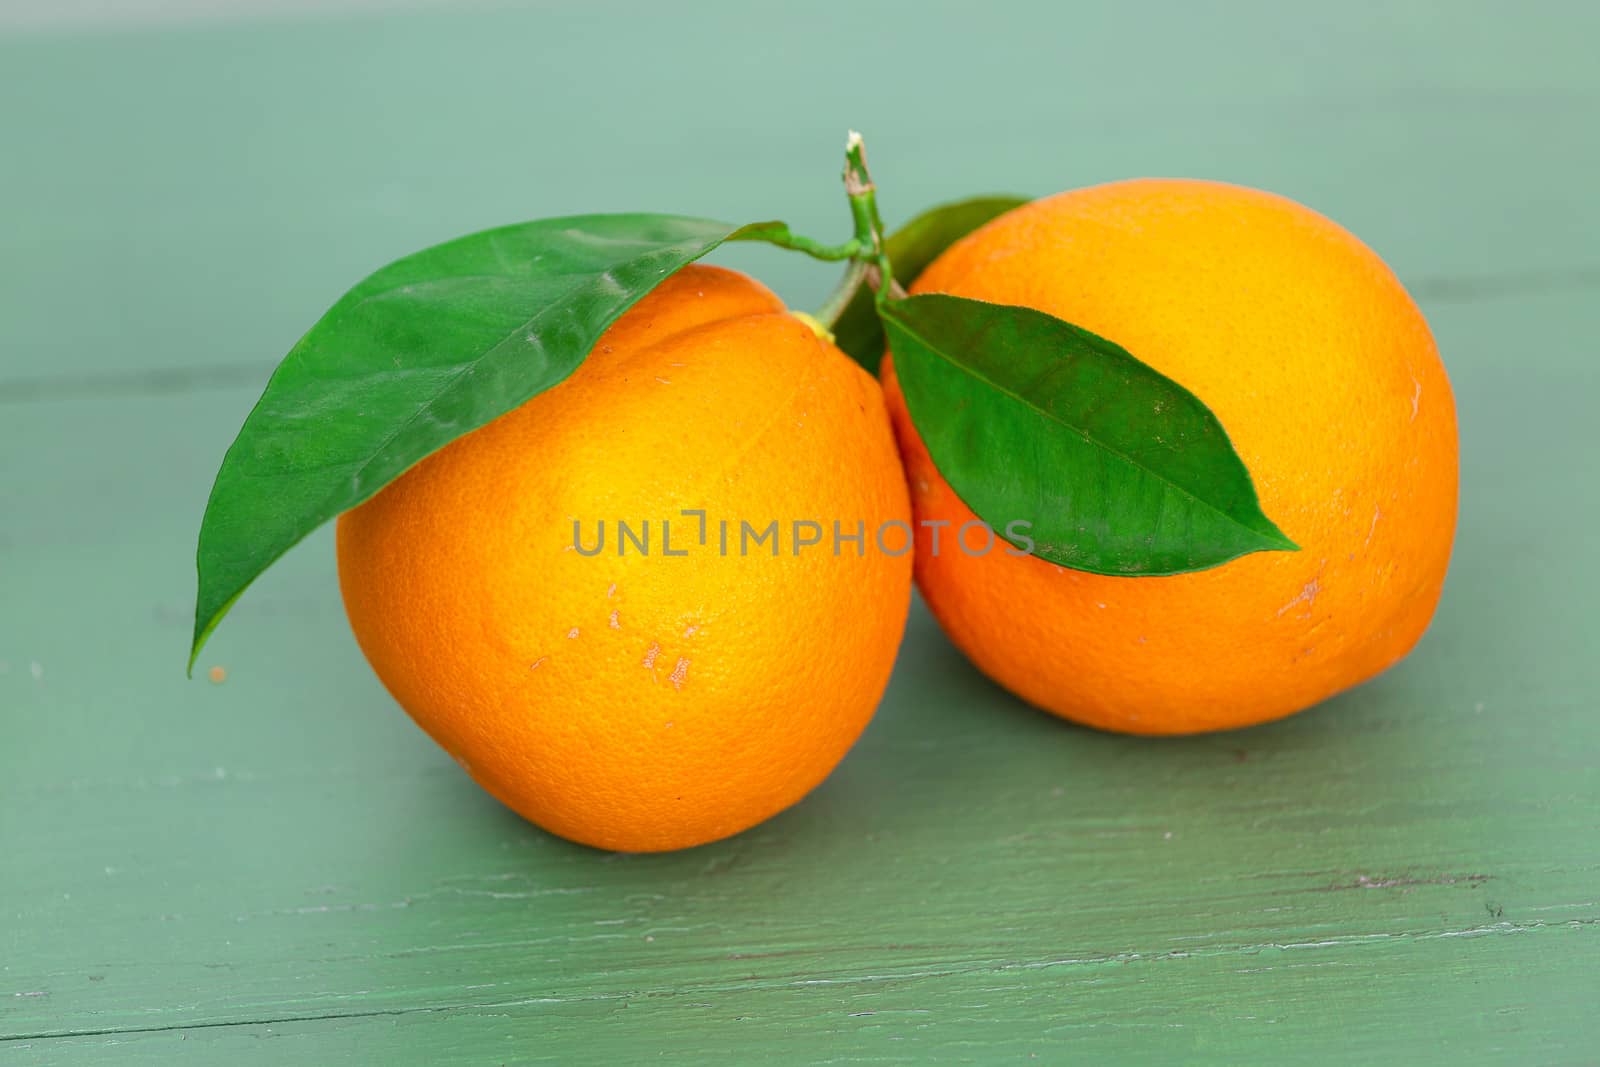 Two big Oranges with Leaves on a green wood table